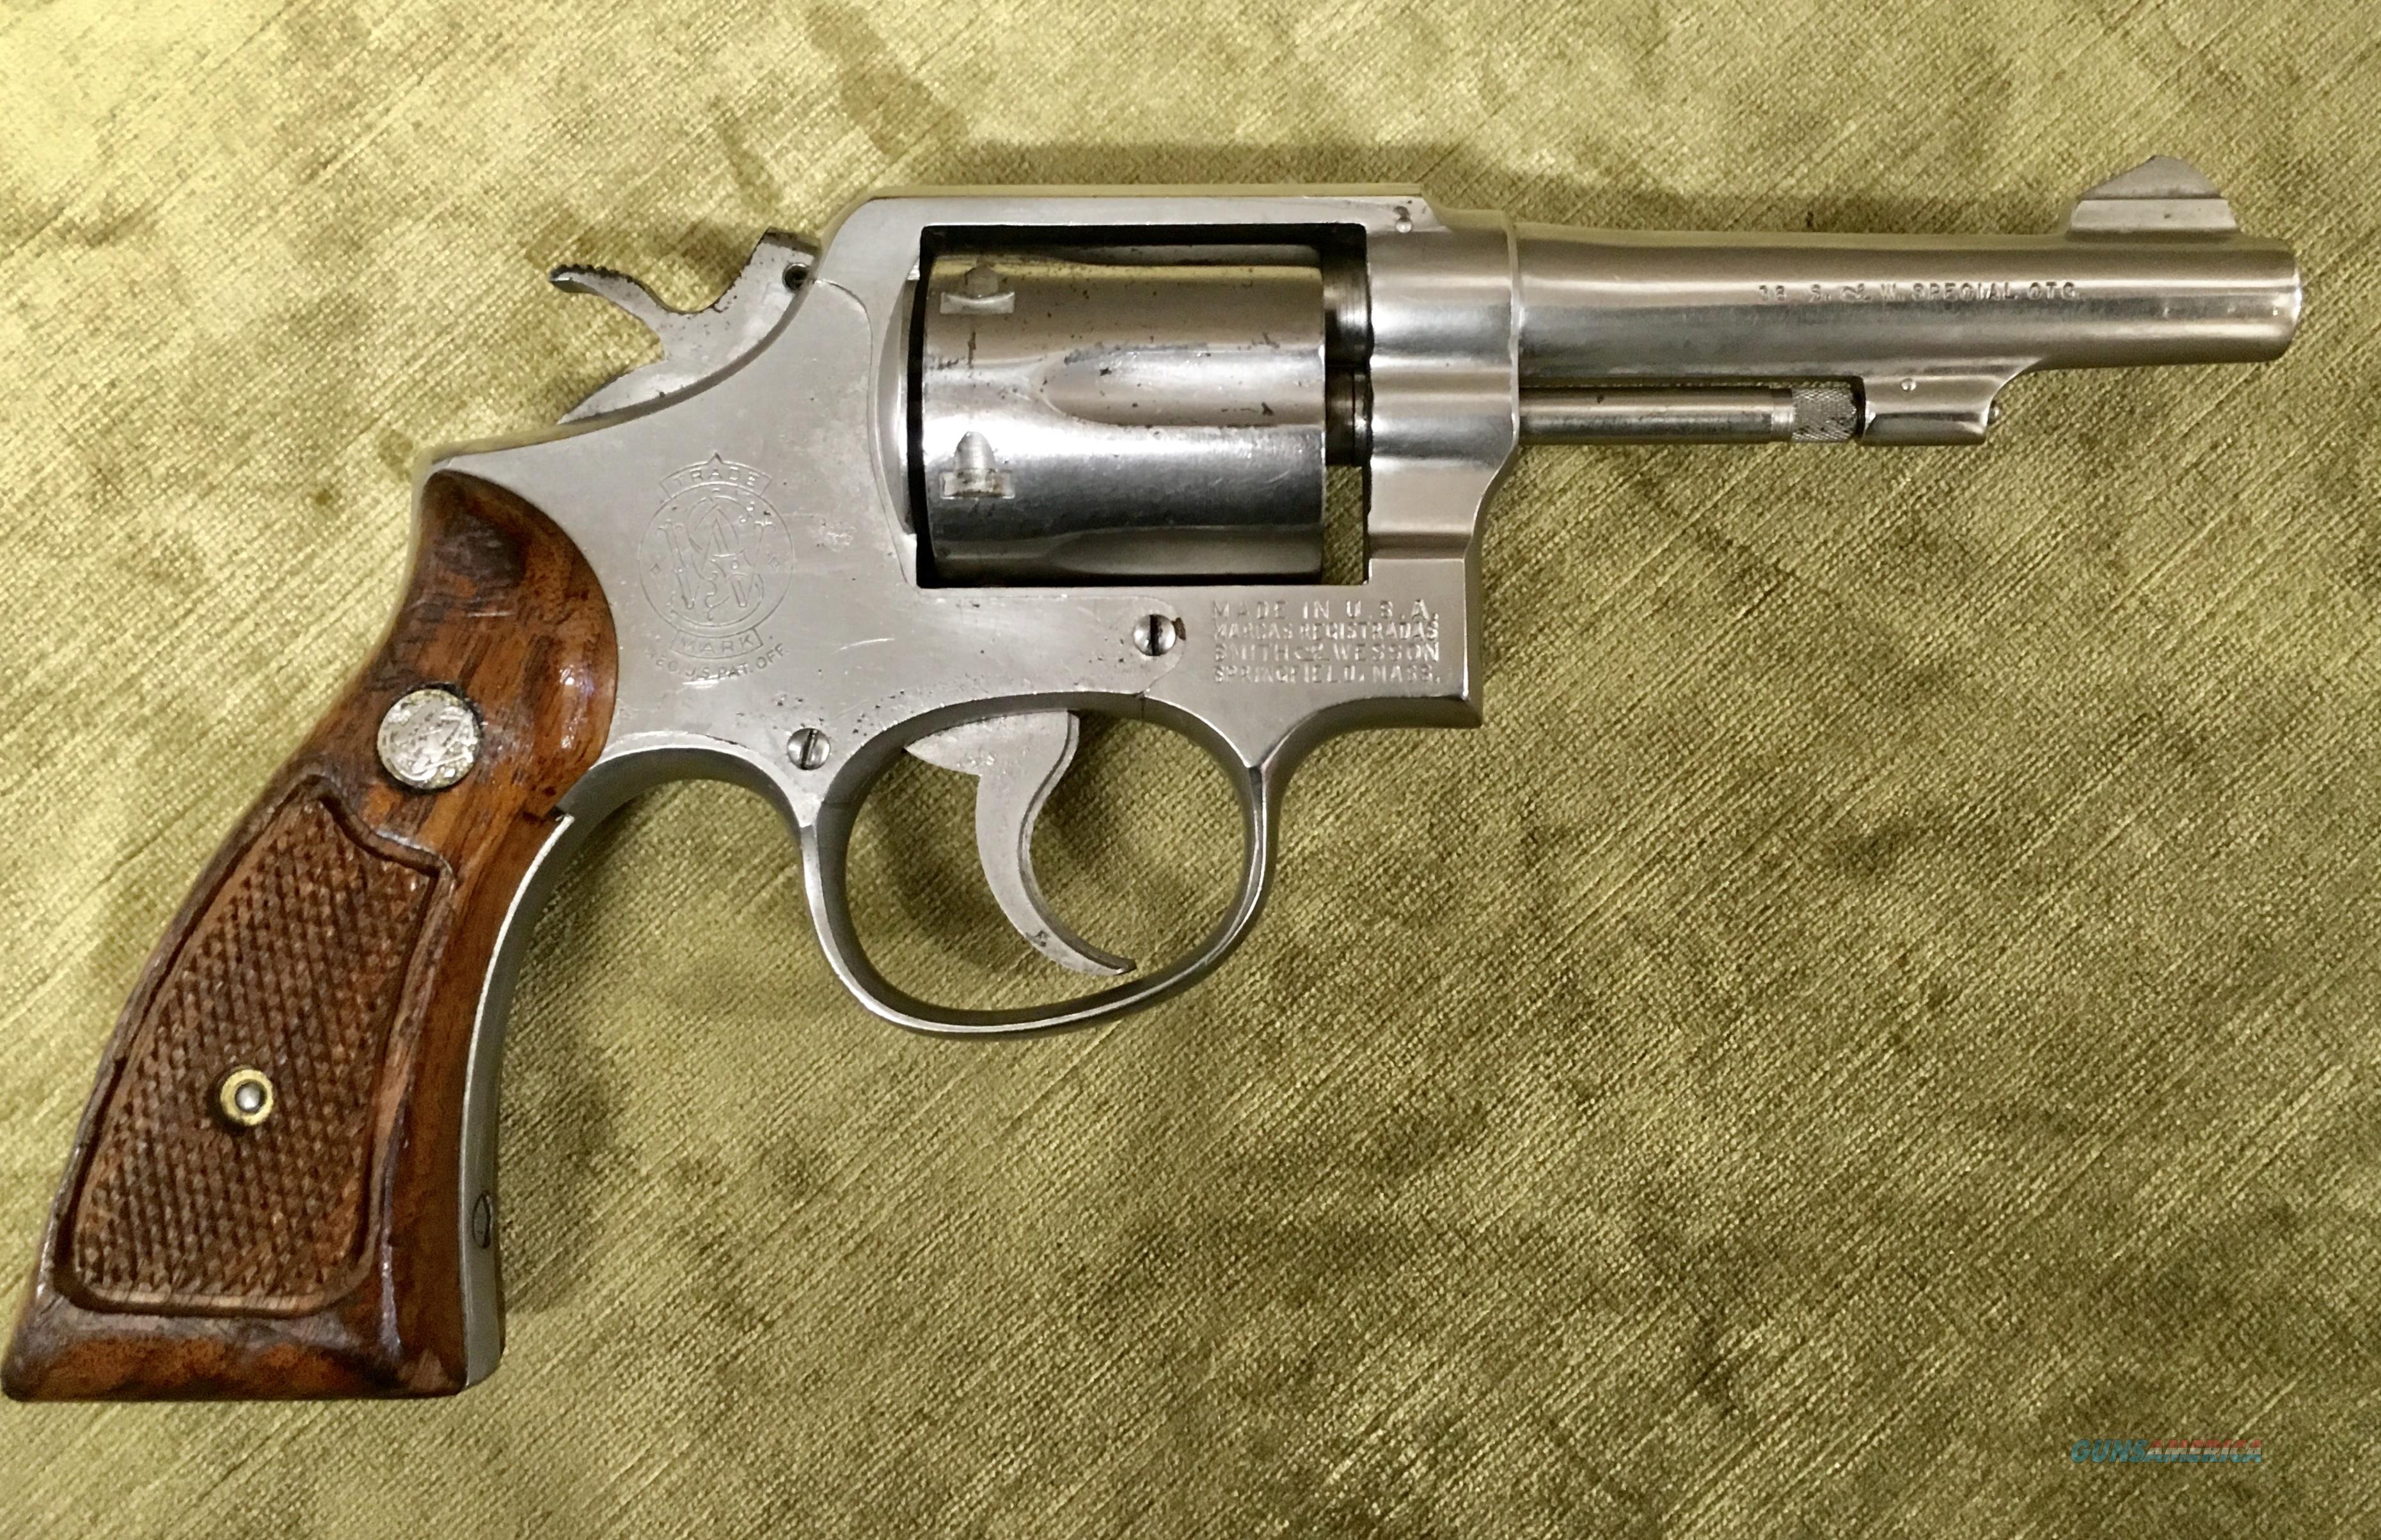 smith and wesson model 10 grips